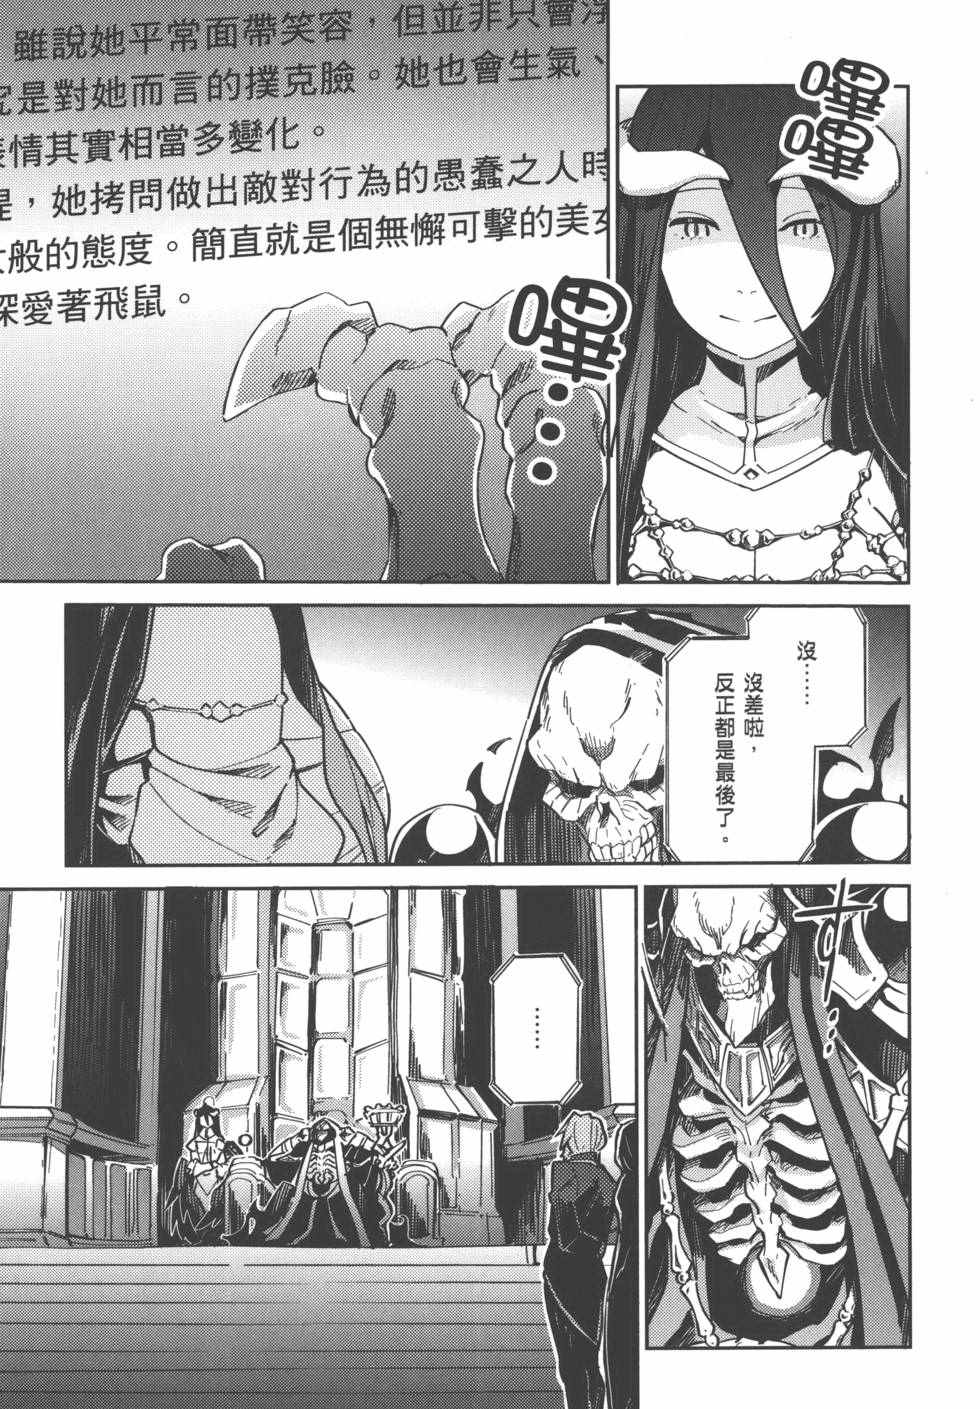 OVERLORD - 第1卷(1/4) - 3